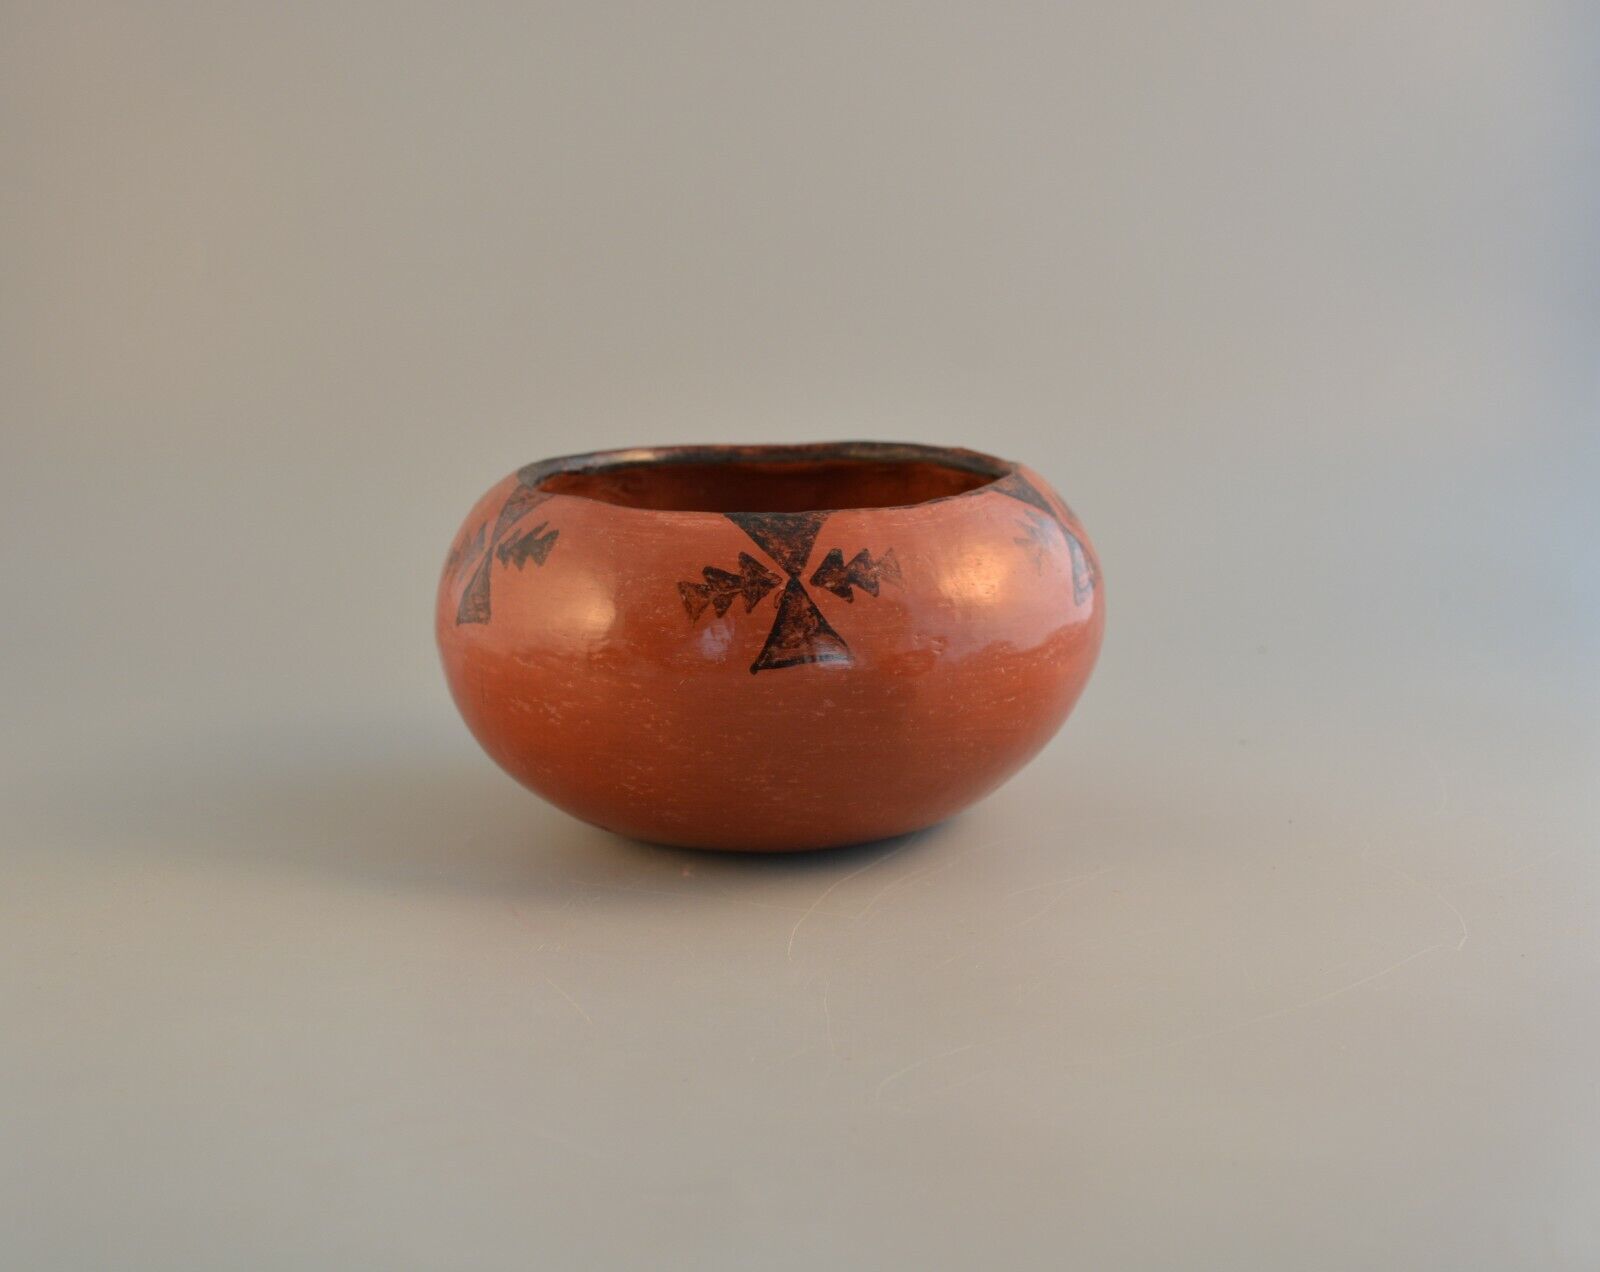 Old Vintage Maricopa Indian Painted Bowl Pot - 1940s